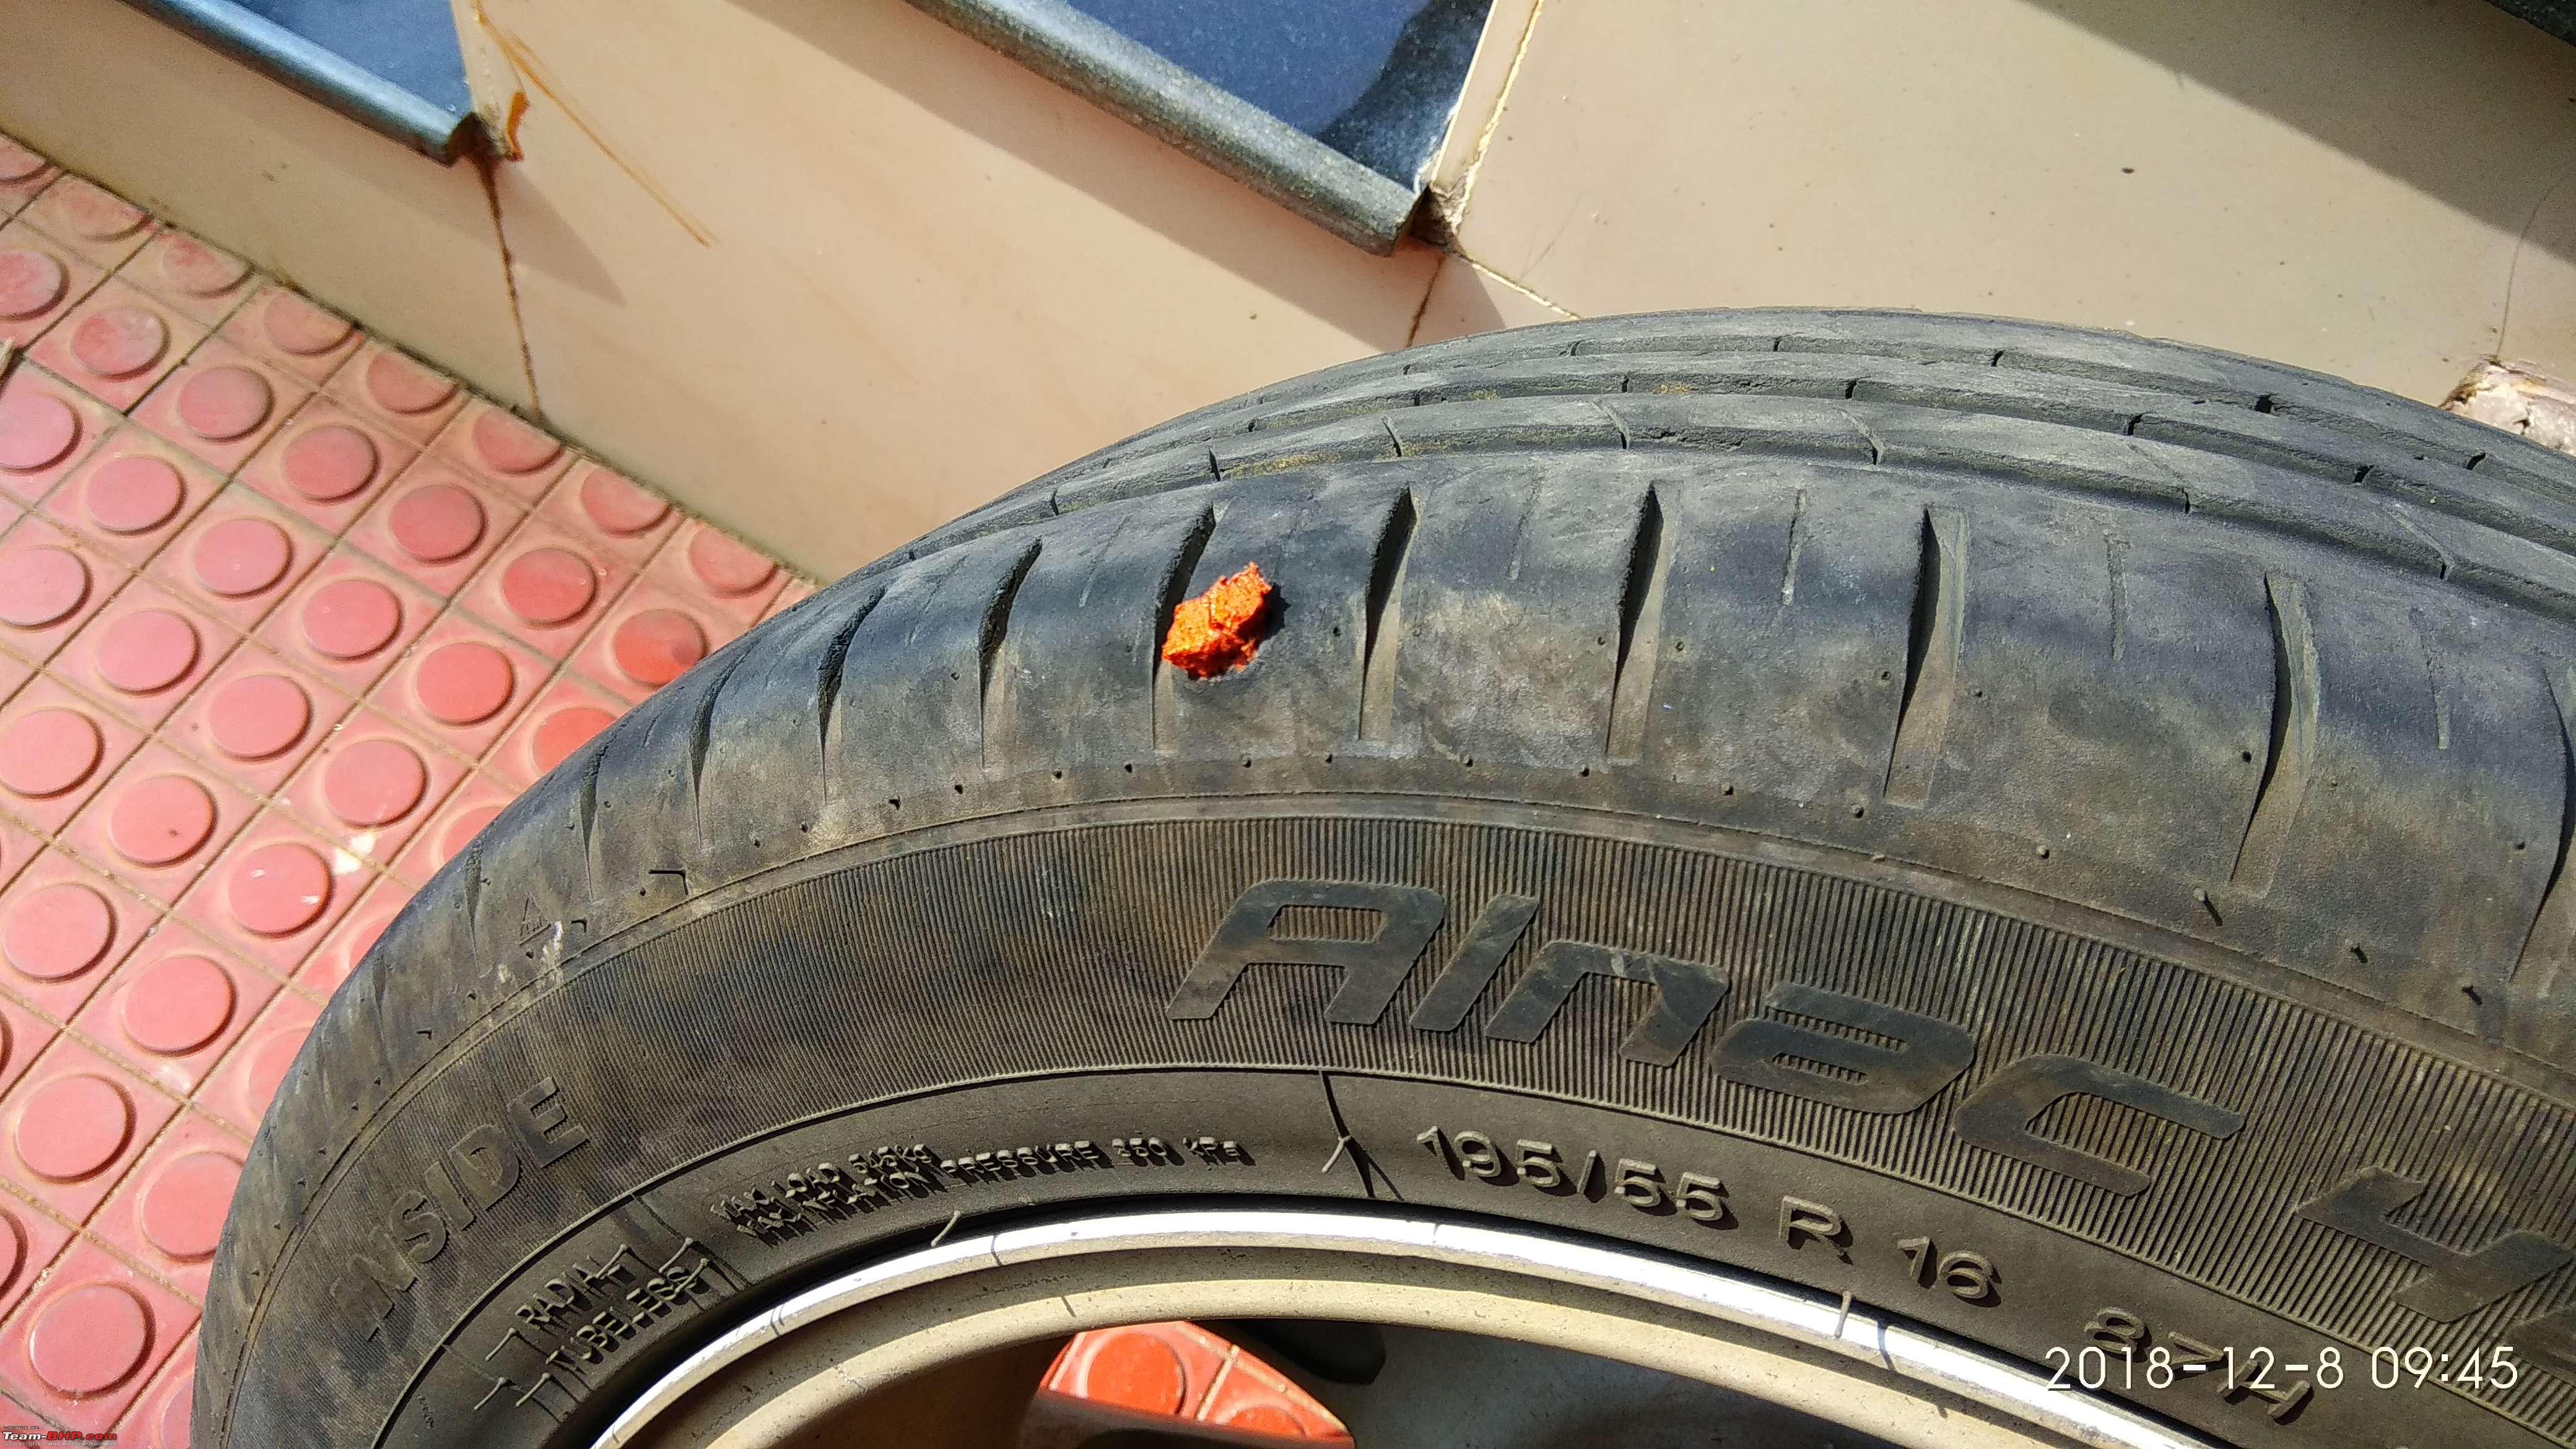 DIY Guide: How to repair a Tubeless tyre puncture! - Page ...